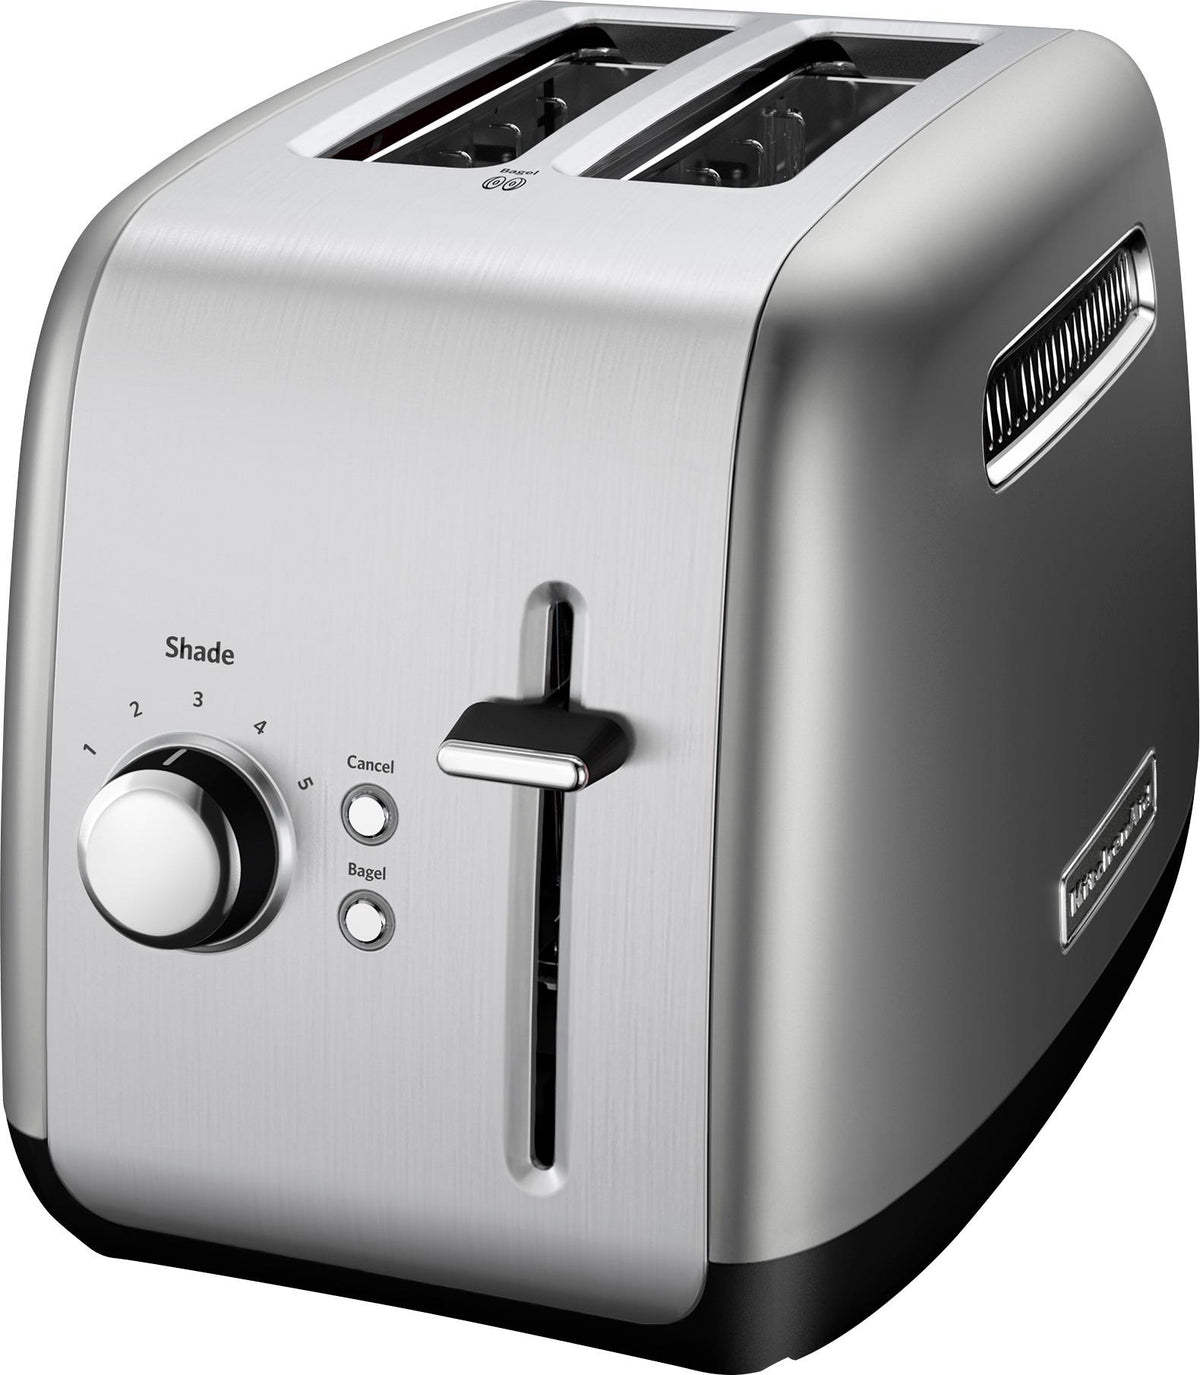 KITCHENAID KMT2115CU 2-Slice Toaster with manual lift lever